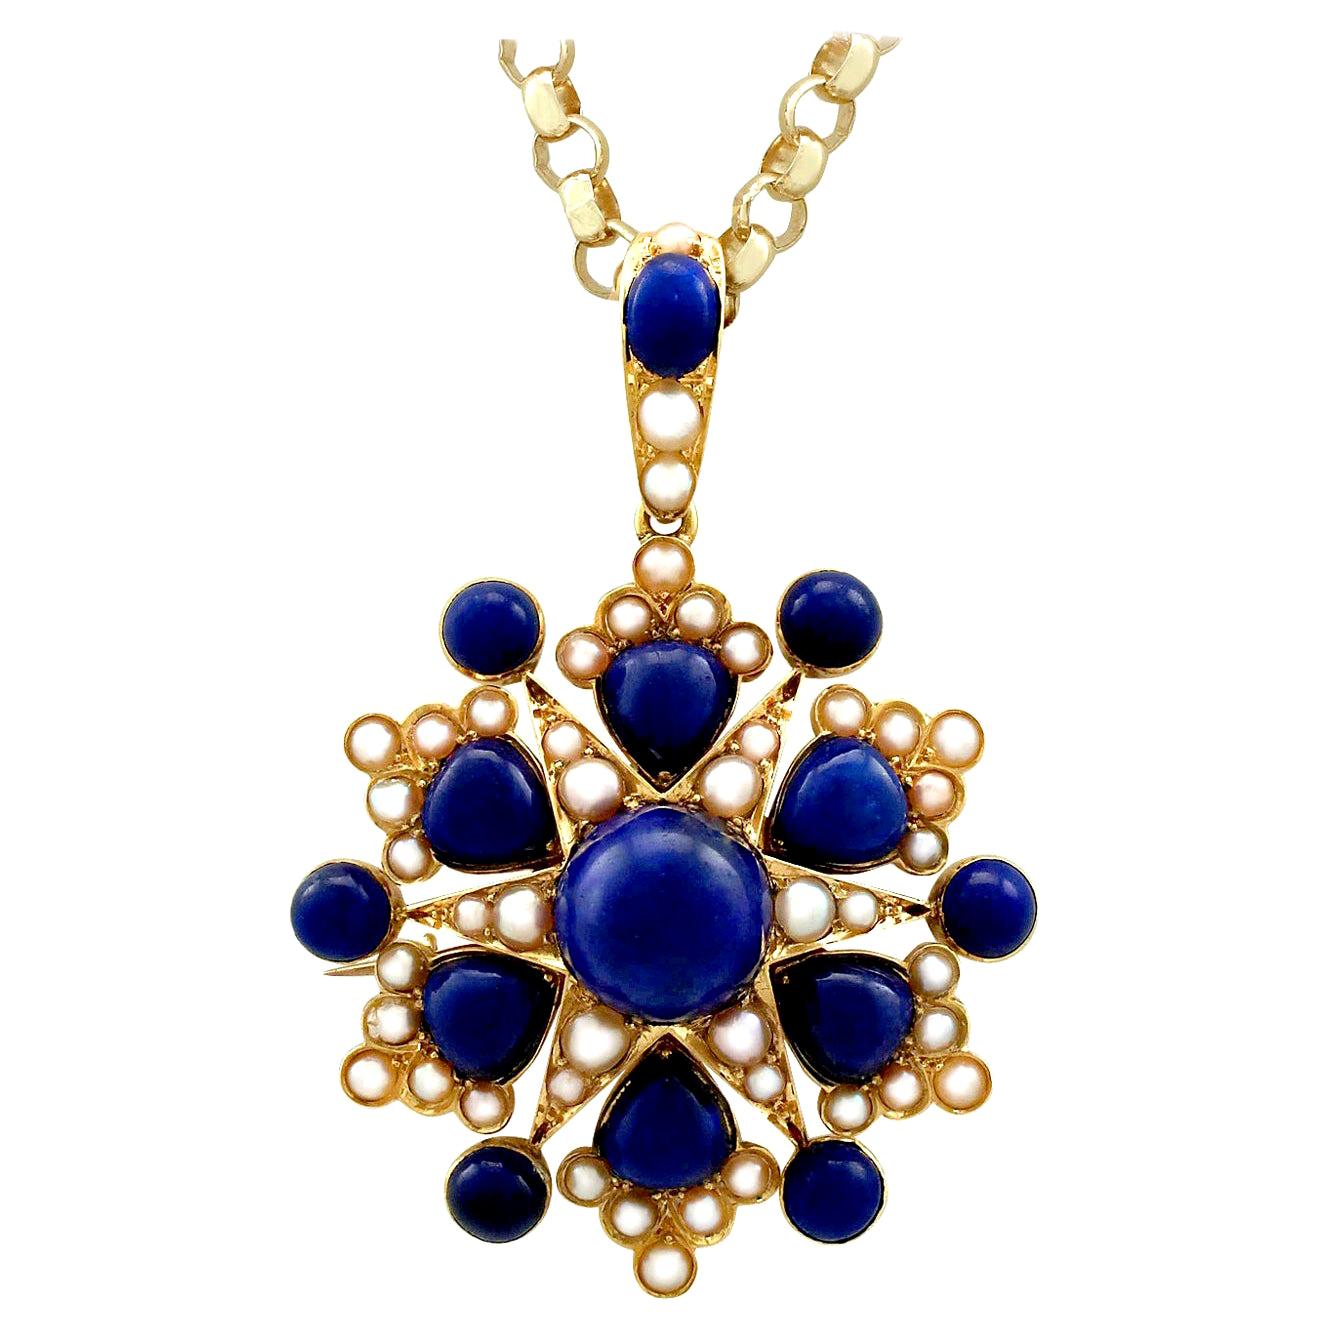 Antique Victorian 13.02 Carat Lapis Lazuli and Pearl Yellow Gold Pendant Brooch